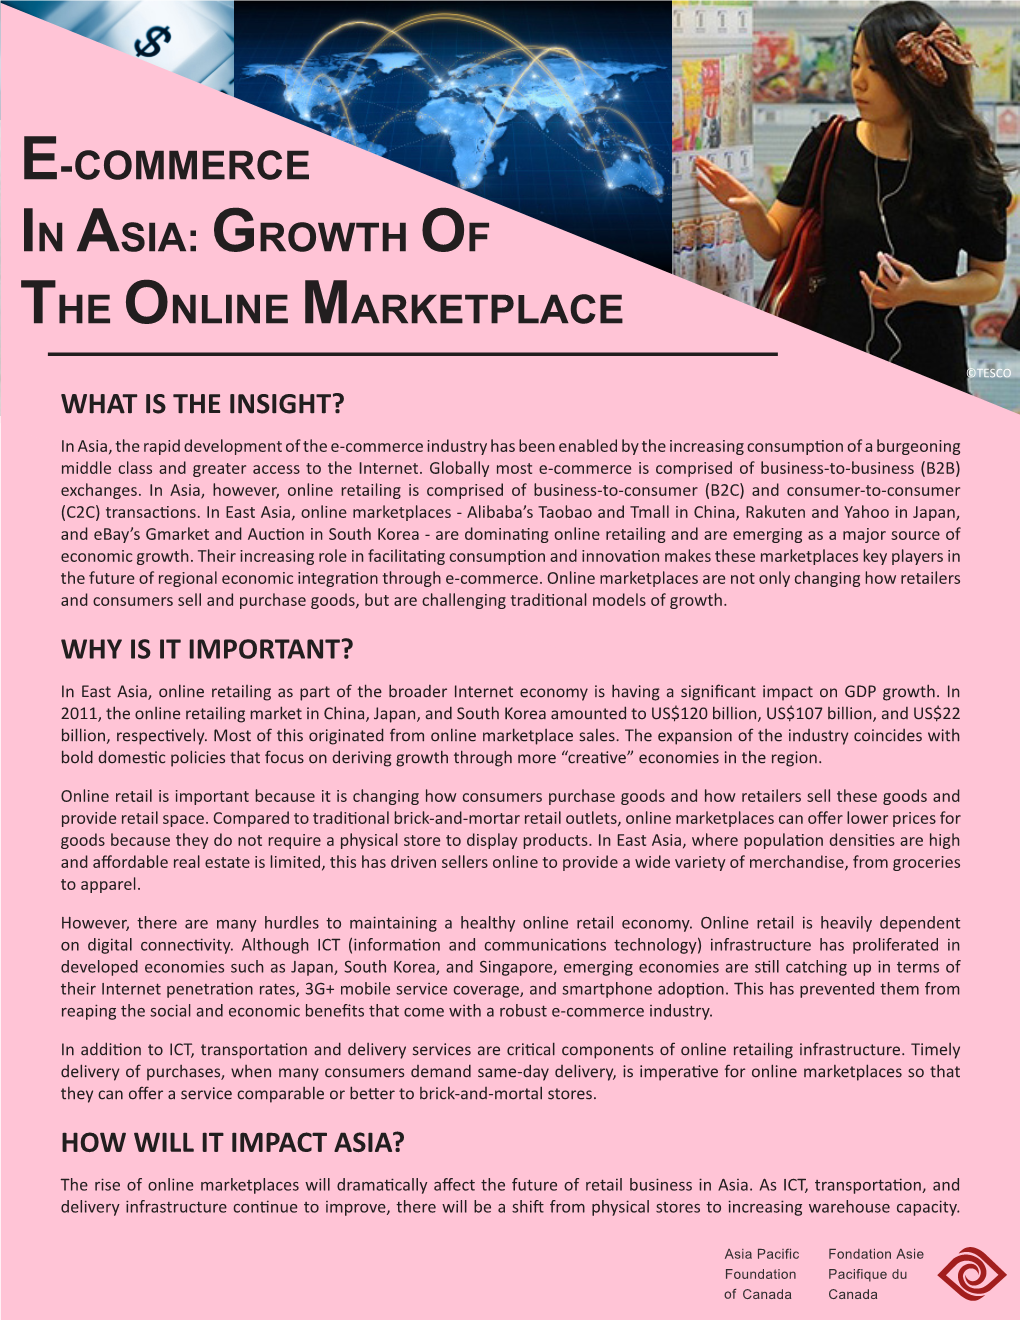 E-Commerce in Asia: Growth of the Online Marketplace